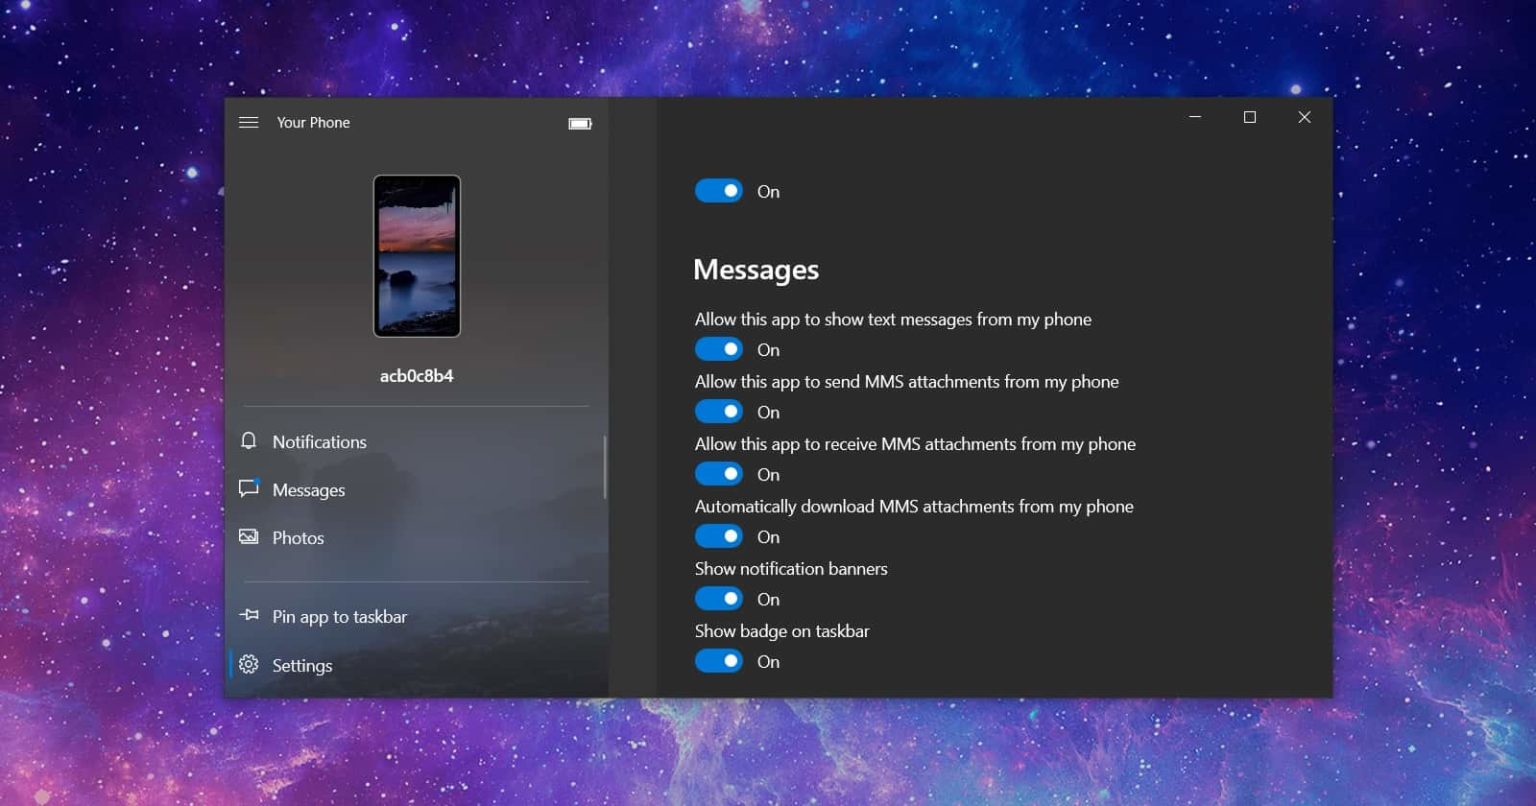 Windows 10 Your Phone app now allows viewing contact information